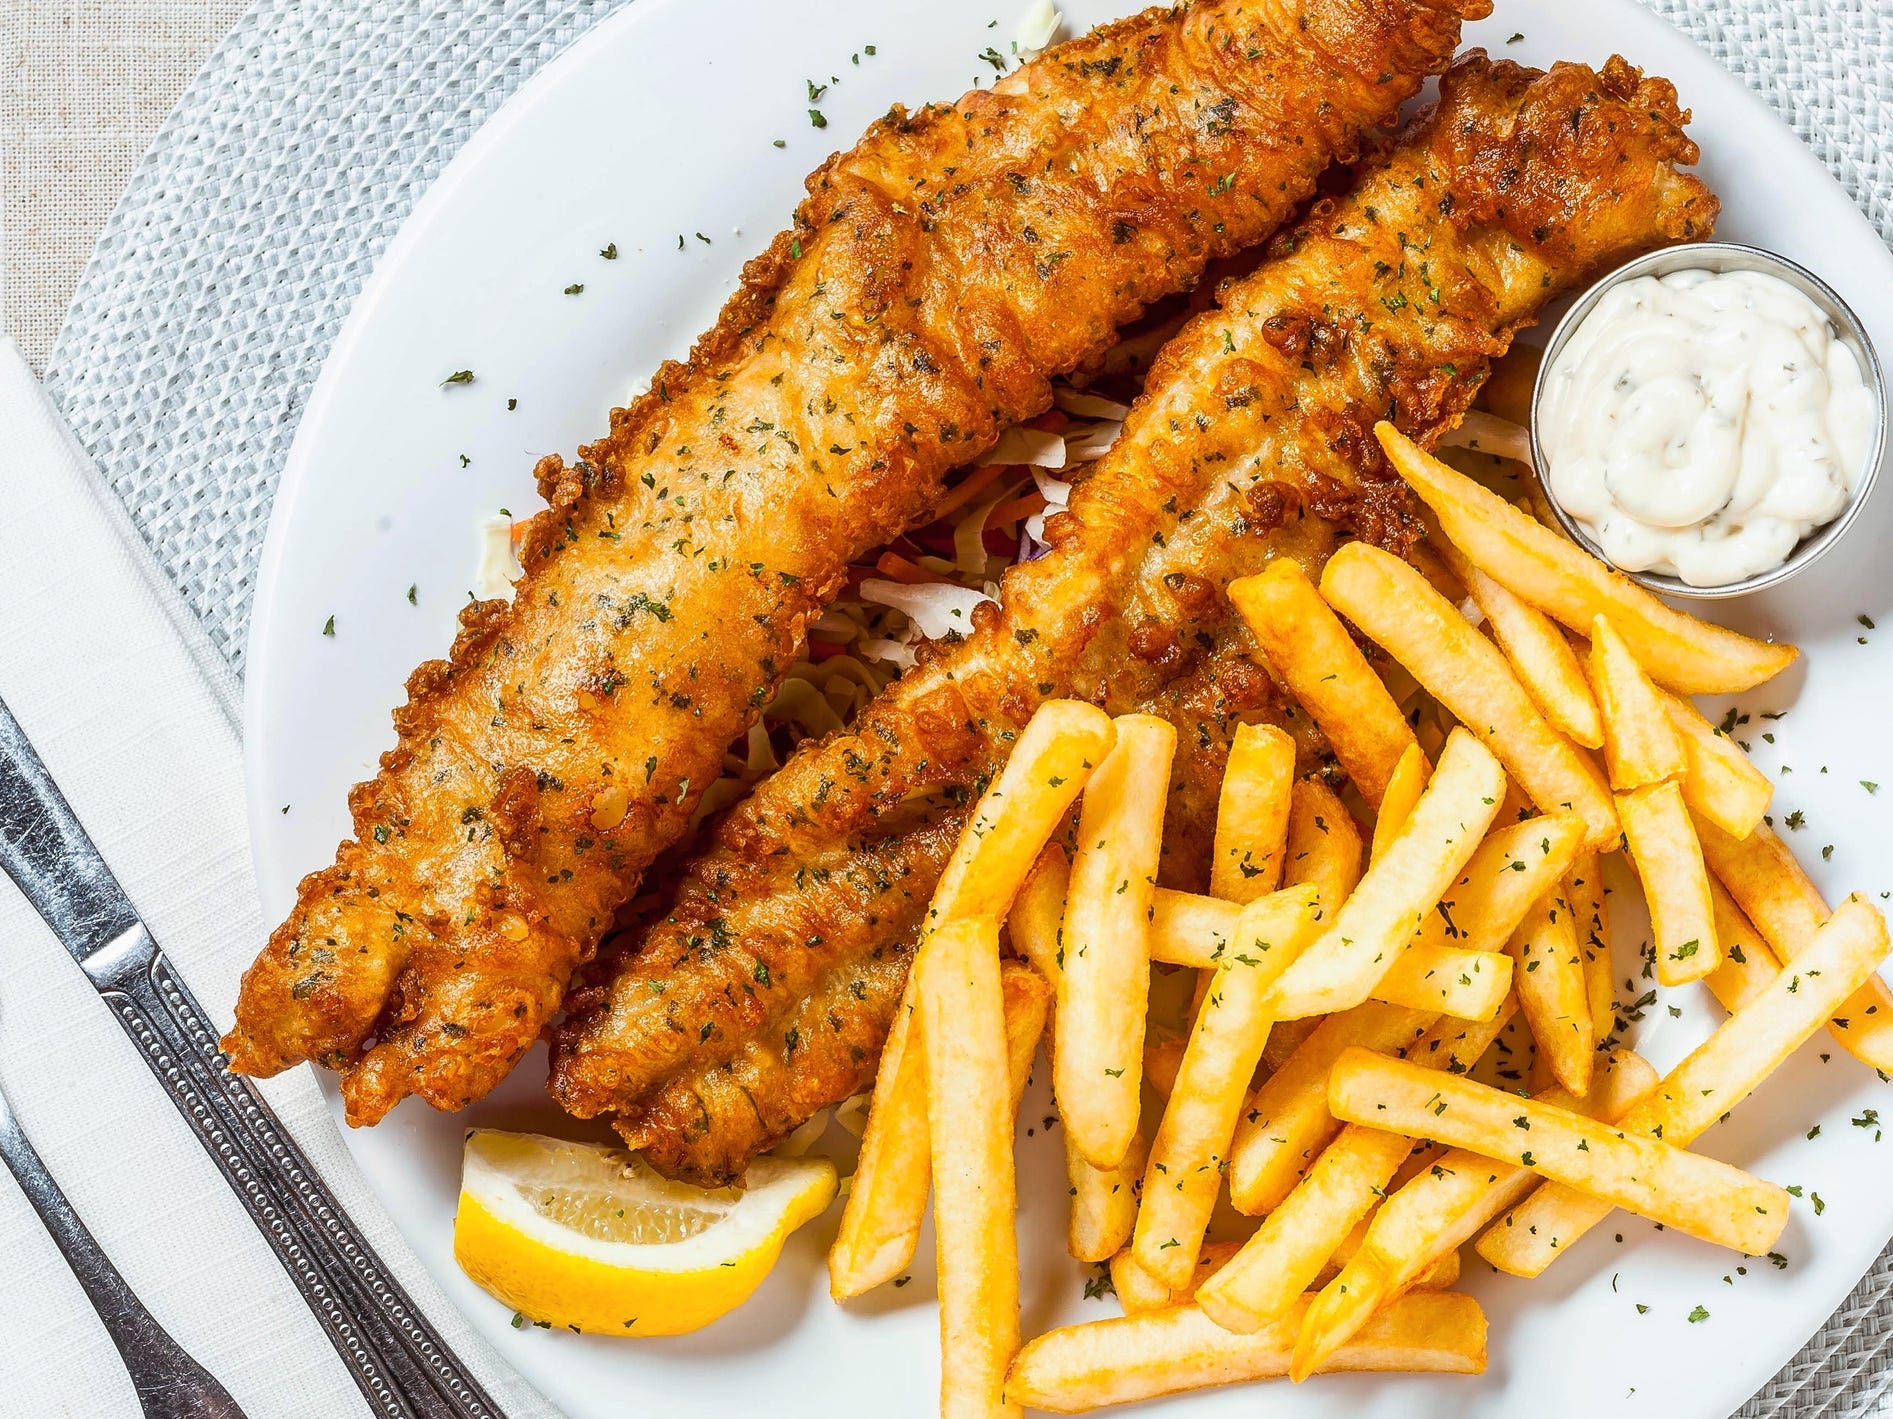 A top-down view of a plate of fish and chips with a side of tartar sauce